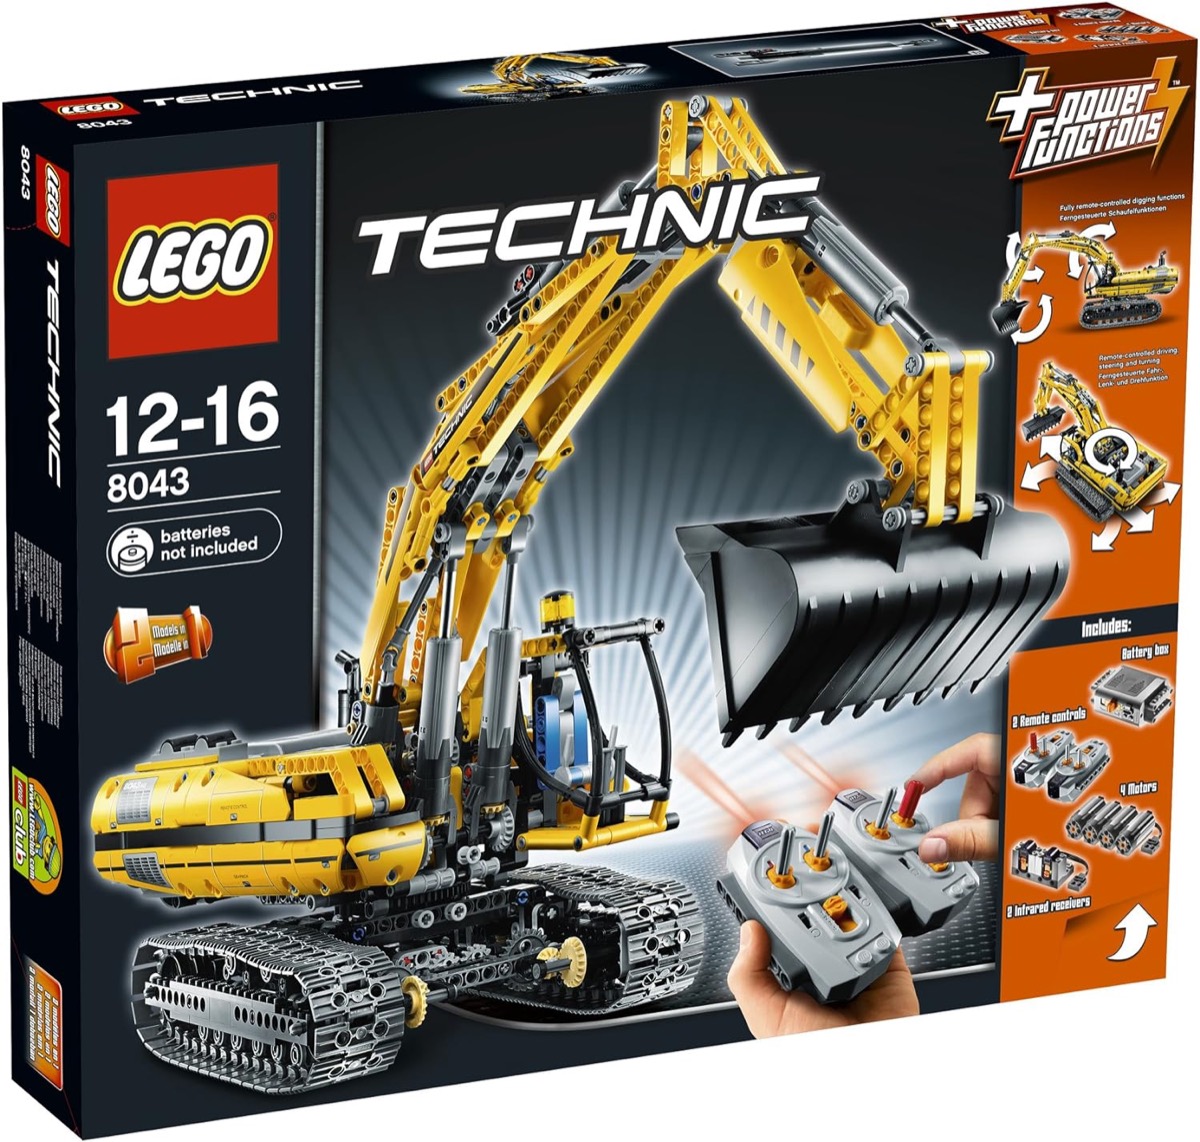 A box picturing the LEGO Motorized Excavator 